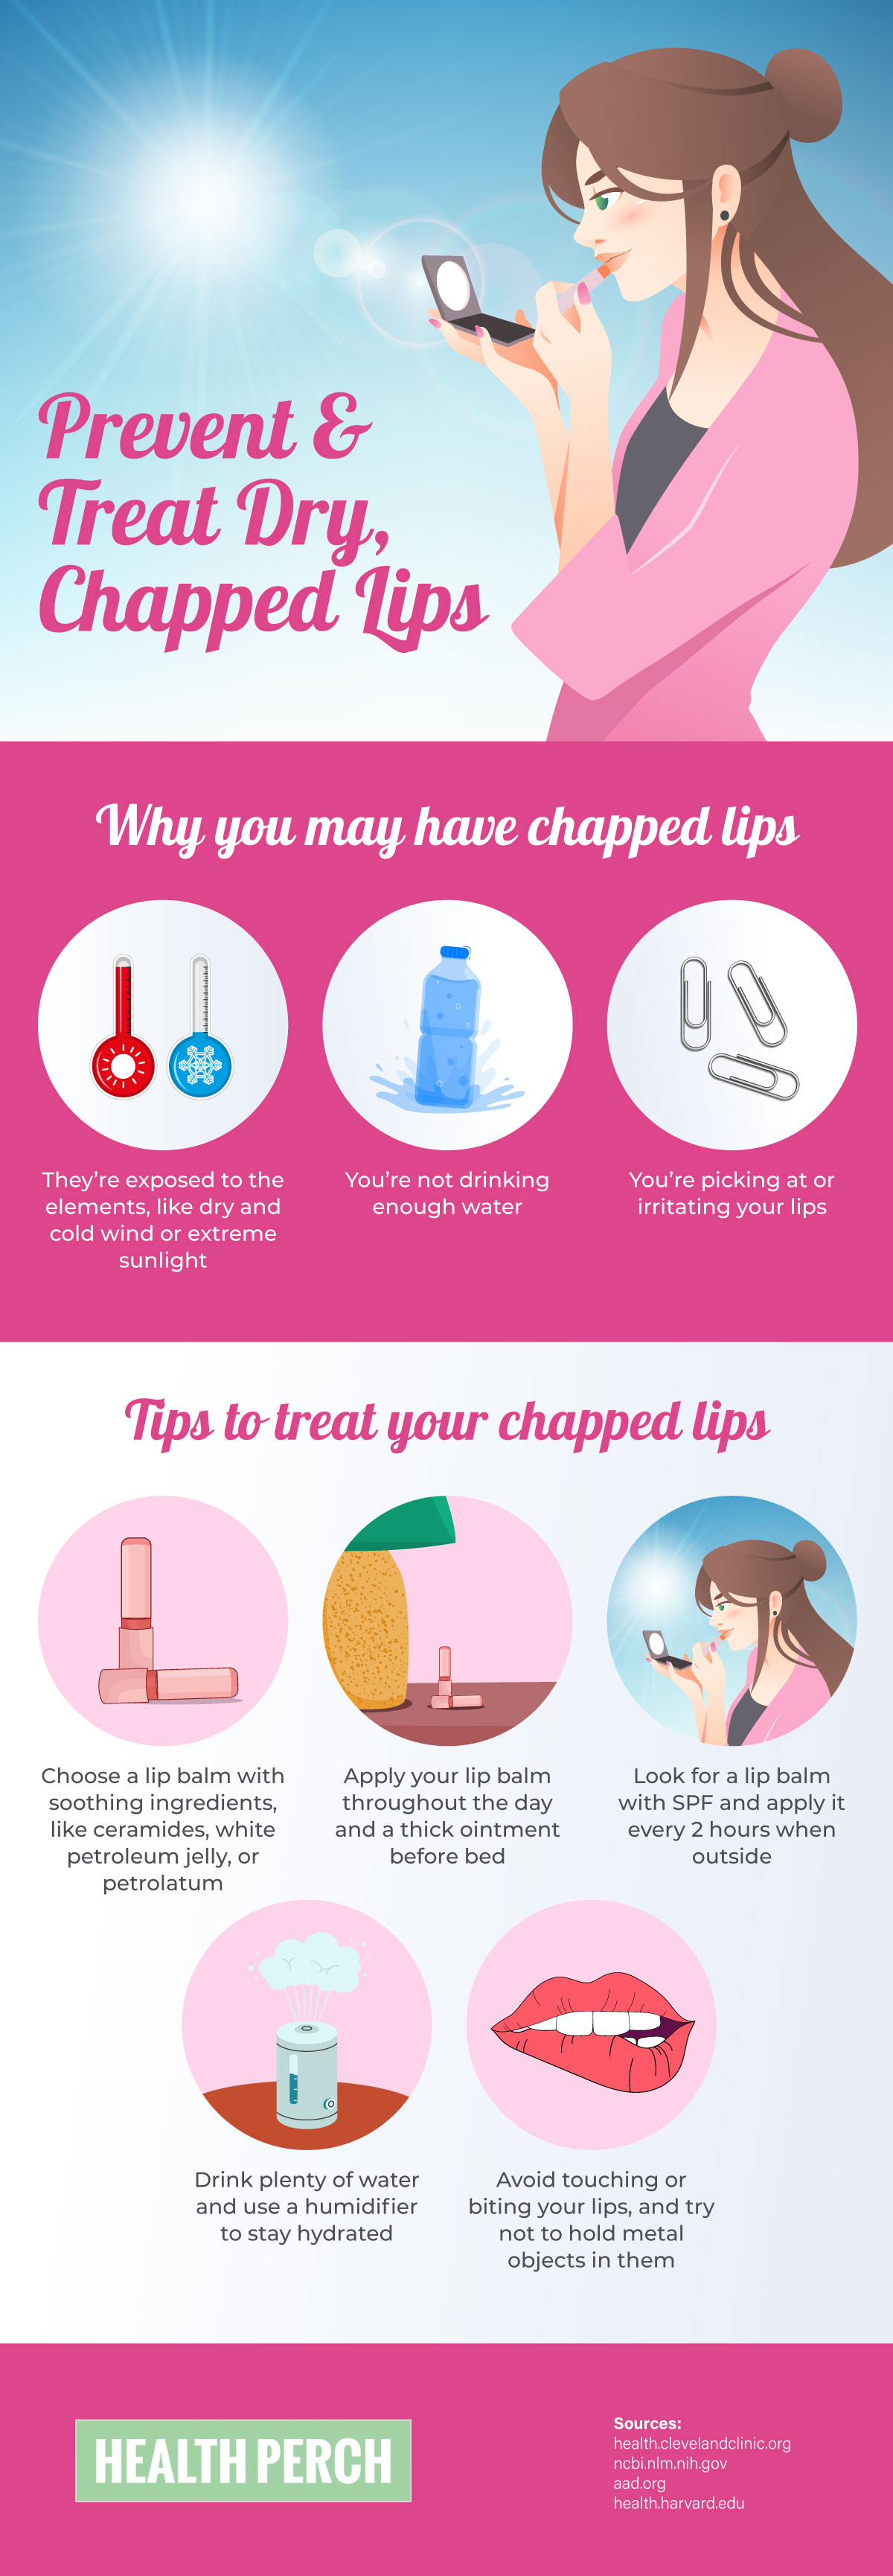 Prevent and Treat Dry, Chapped Lips Infographic